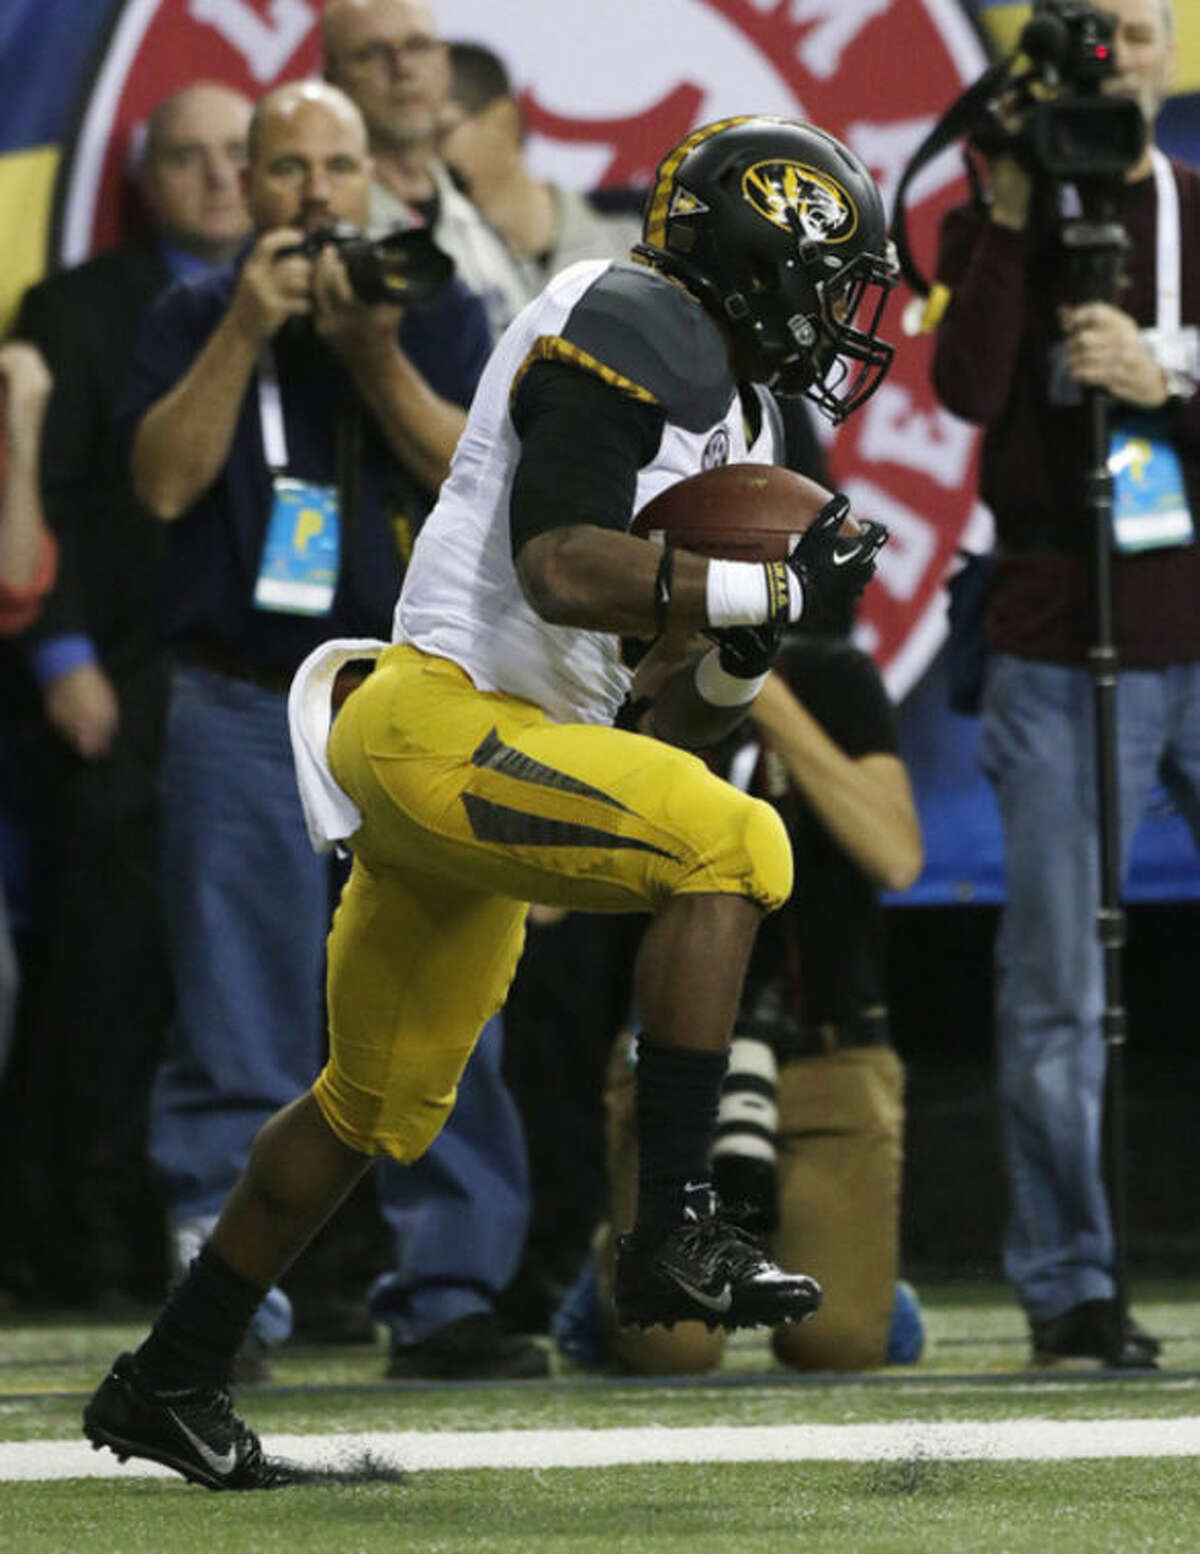 Missouri running back Marcus Murphy (6) makes a catch in the end zone against Auburn during the second half of the Southeastern Conference NCAA football championship game, Saturday, Dec. 7, 2013, in Atlanta. (AP Photo/Dave Martin)